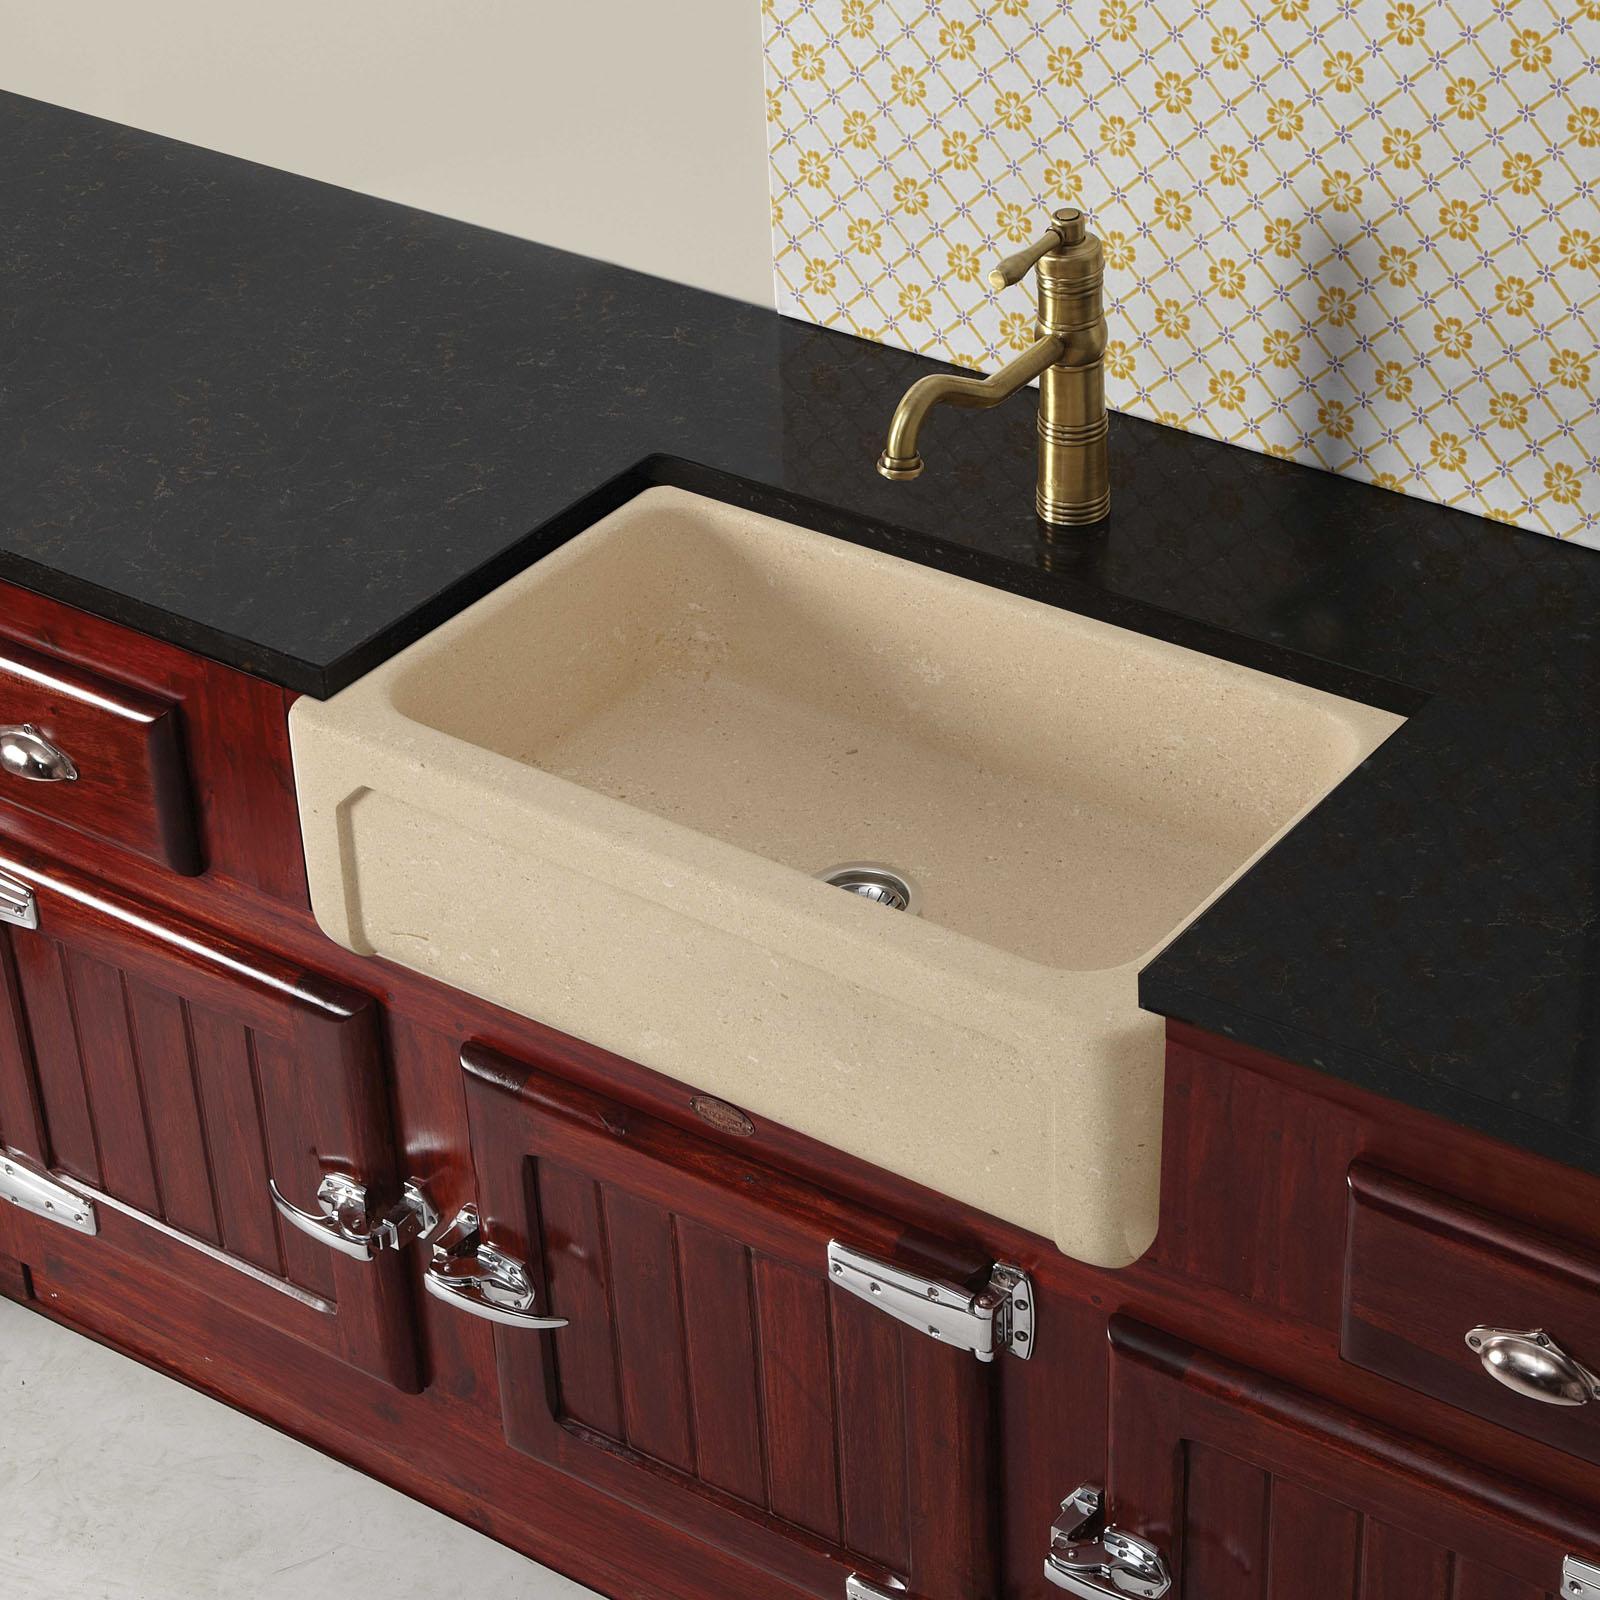 High-quality sink Childéric II - single bowl, vicenza stone - ambience